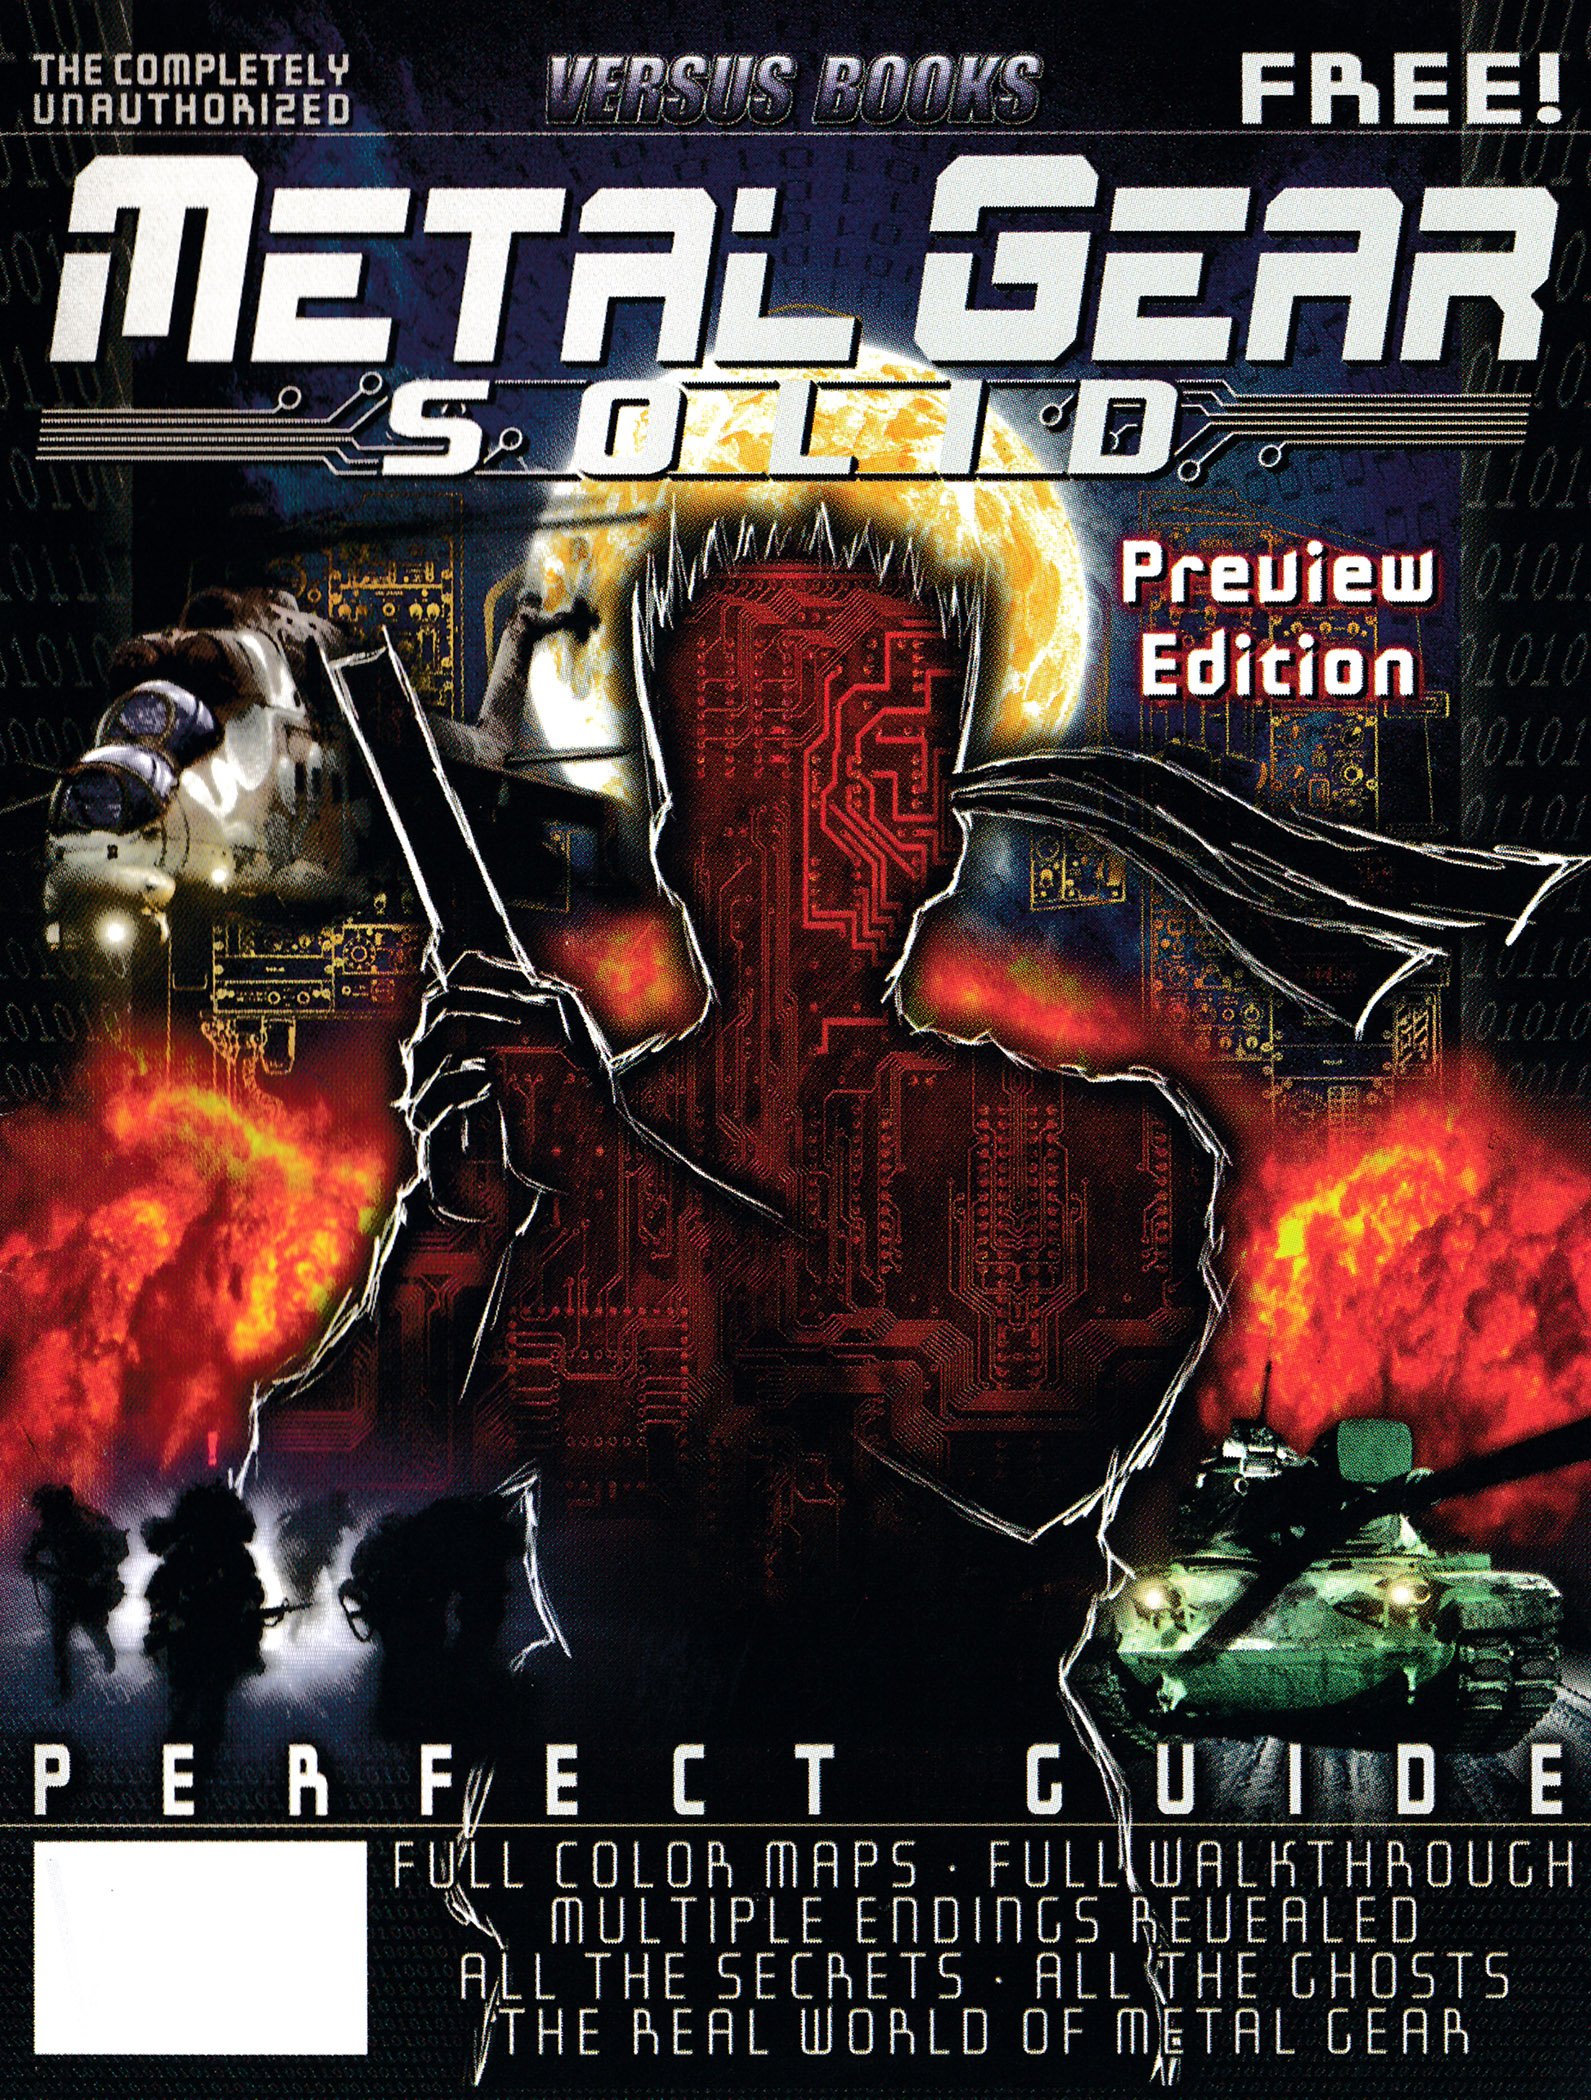 Metal Gear Solid Preview Edition Perfect Guide (1998)